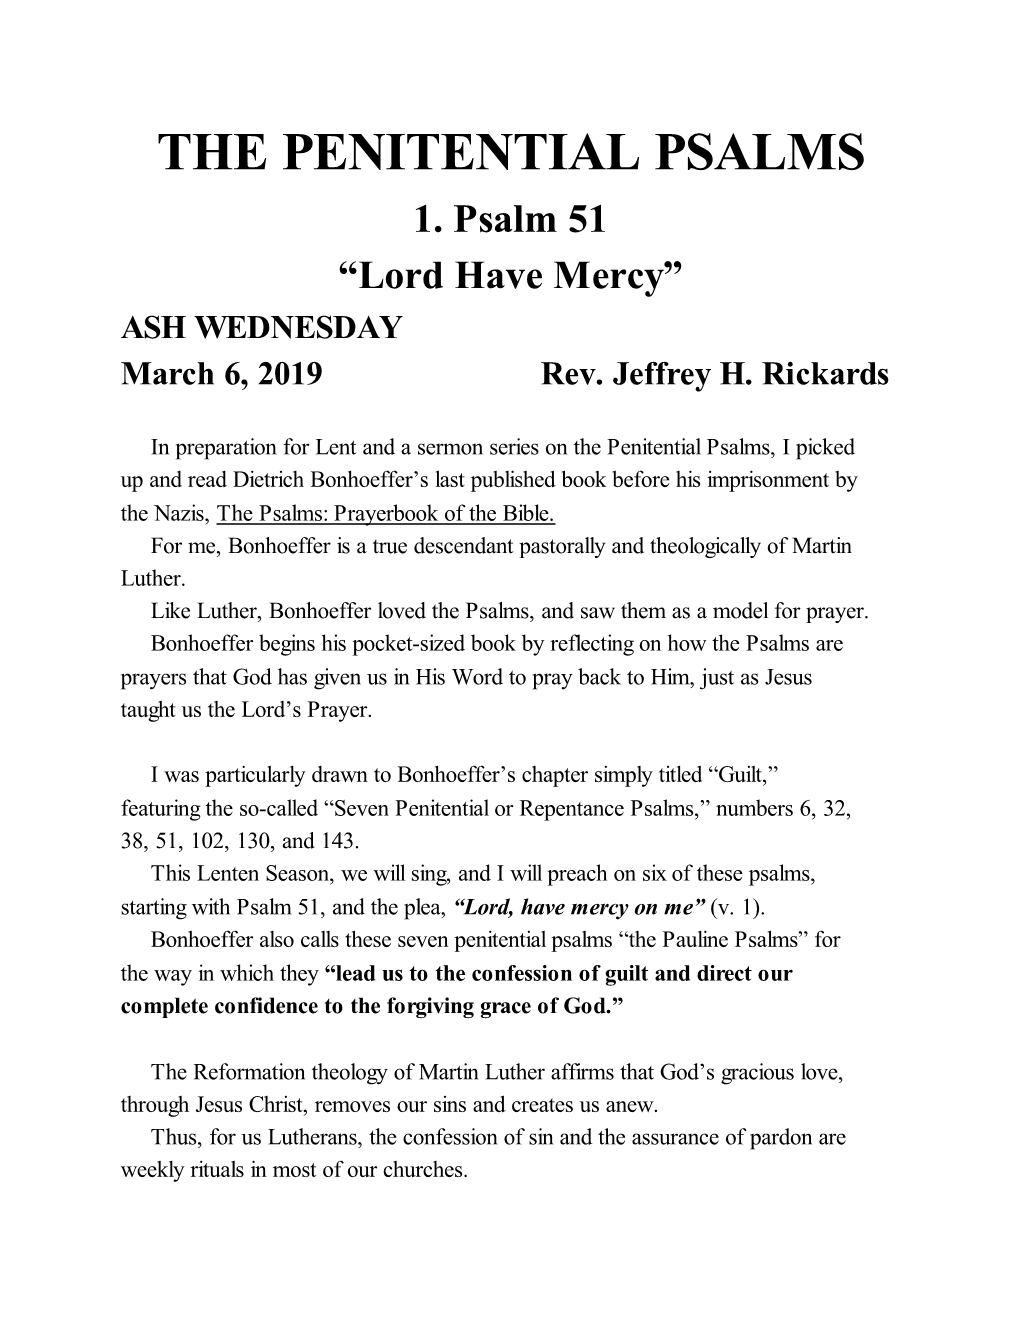 The Penitential Psalms 1